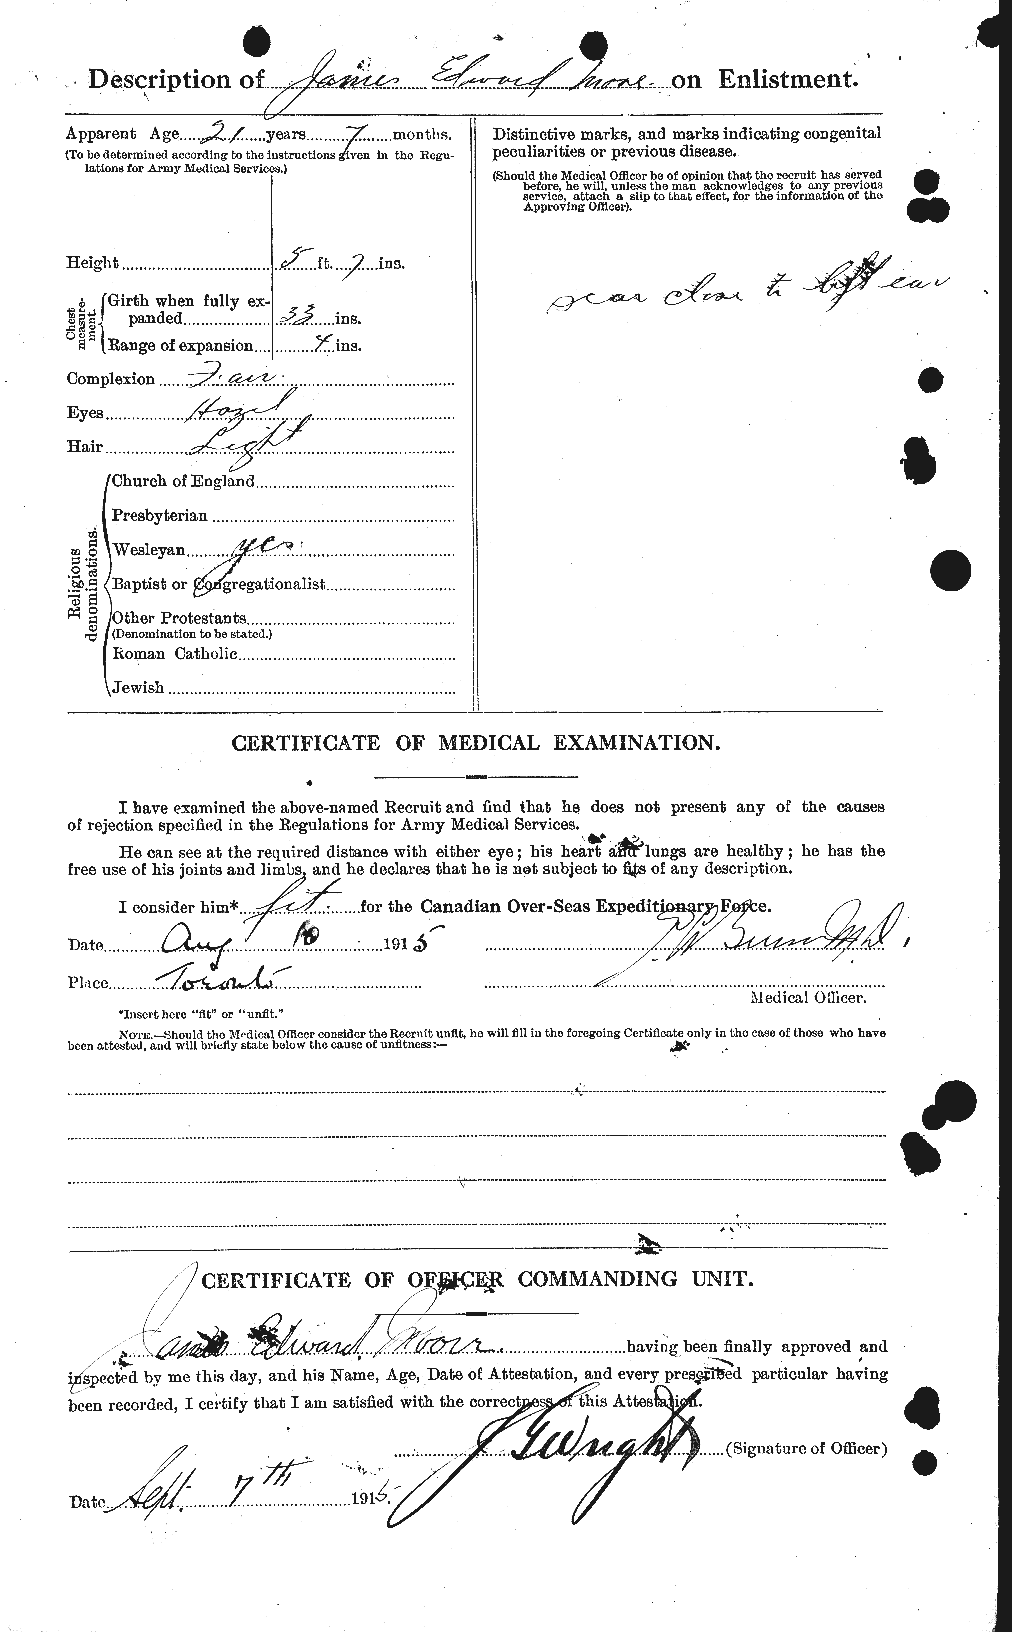 Personnel Records of the First World War - CEF 502211b